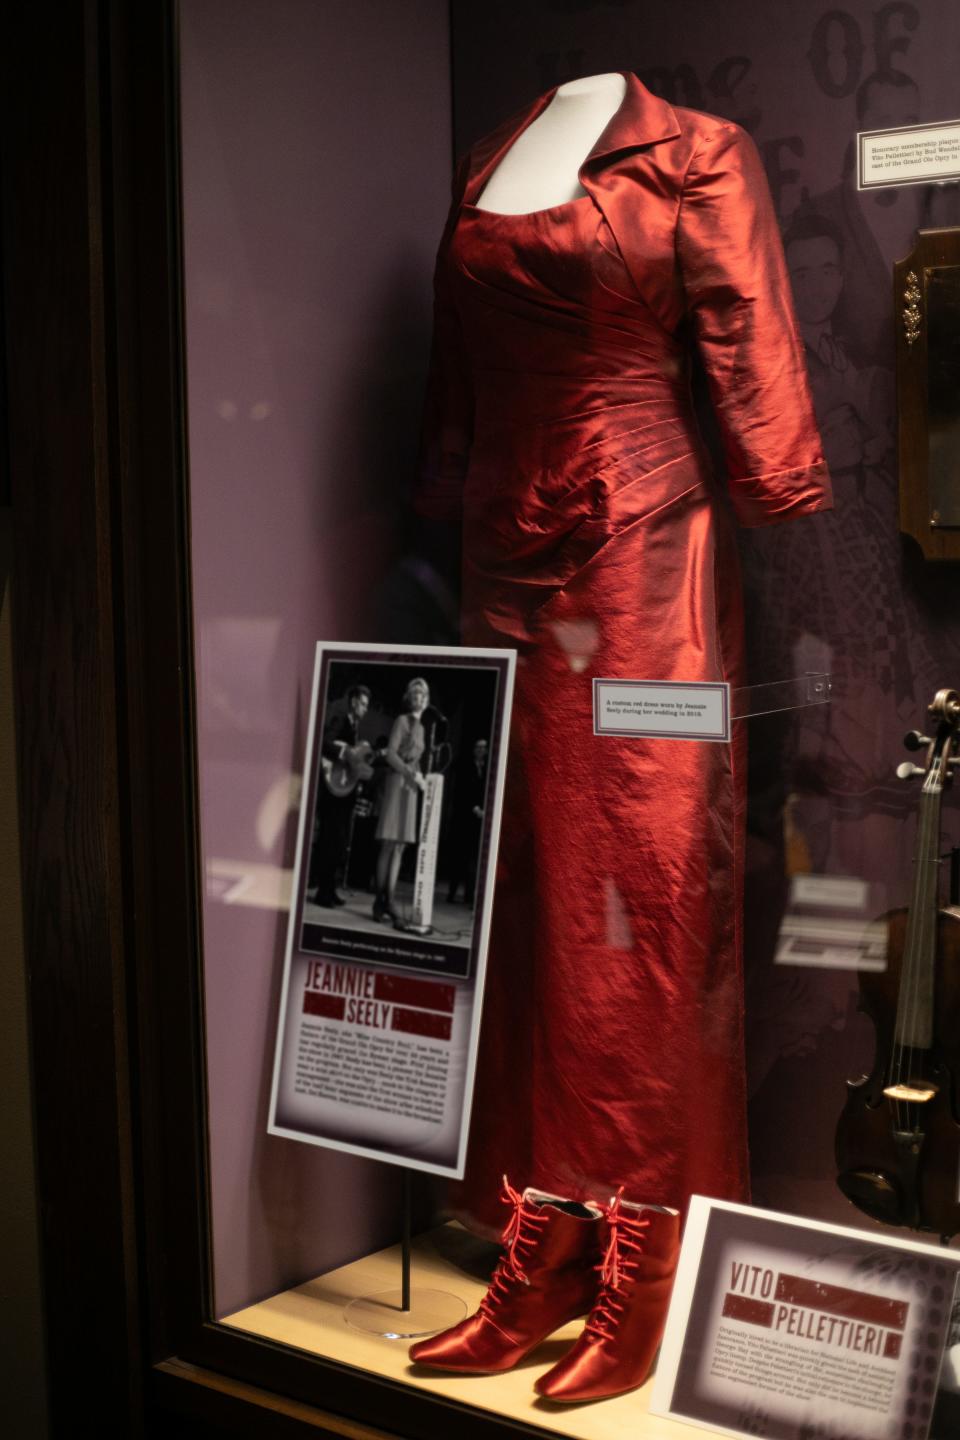 A red satin gown worn by Jeannie Seely on the Grand Ole Opry has been added to the Ryman Auditorium's exhibition honoring the Opry's "golden era."